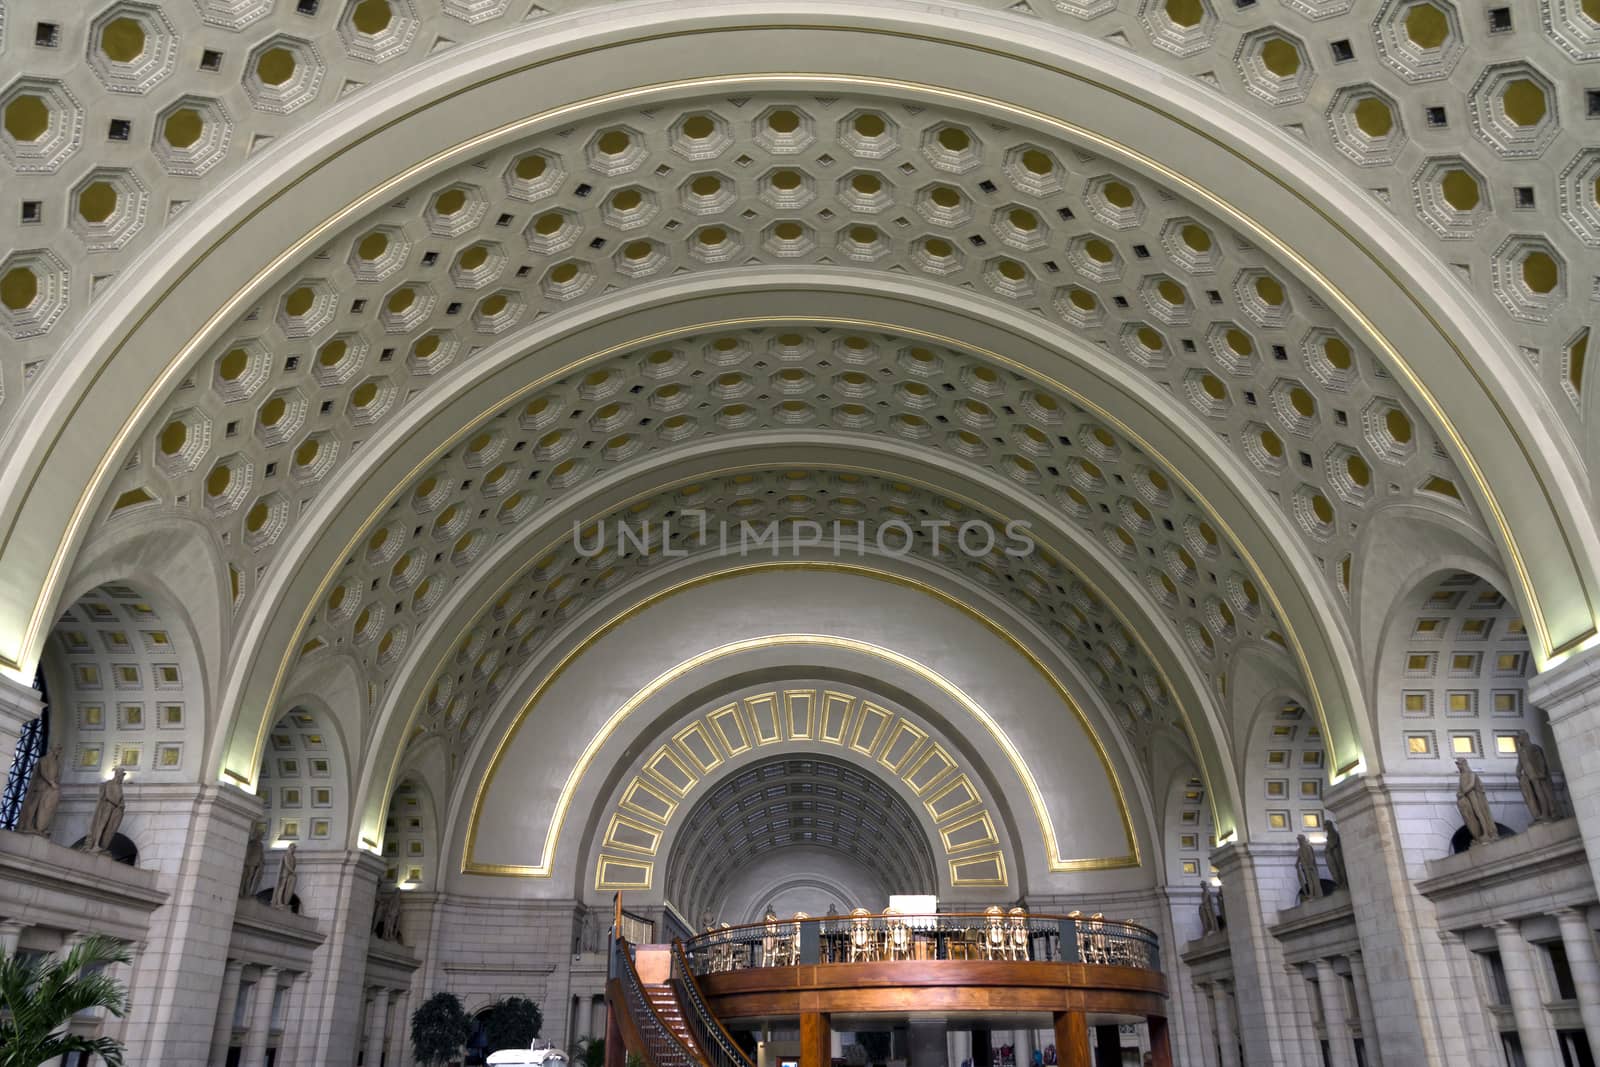 The interior of the main entry of Union Station in Washington DC